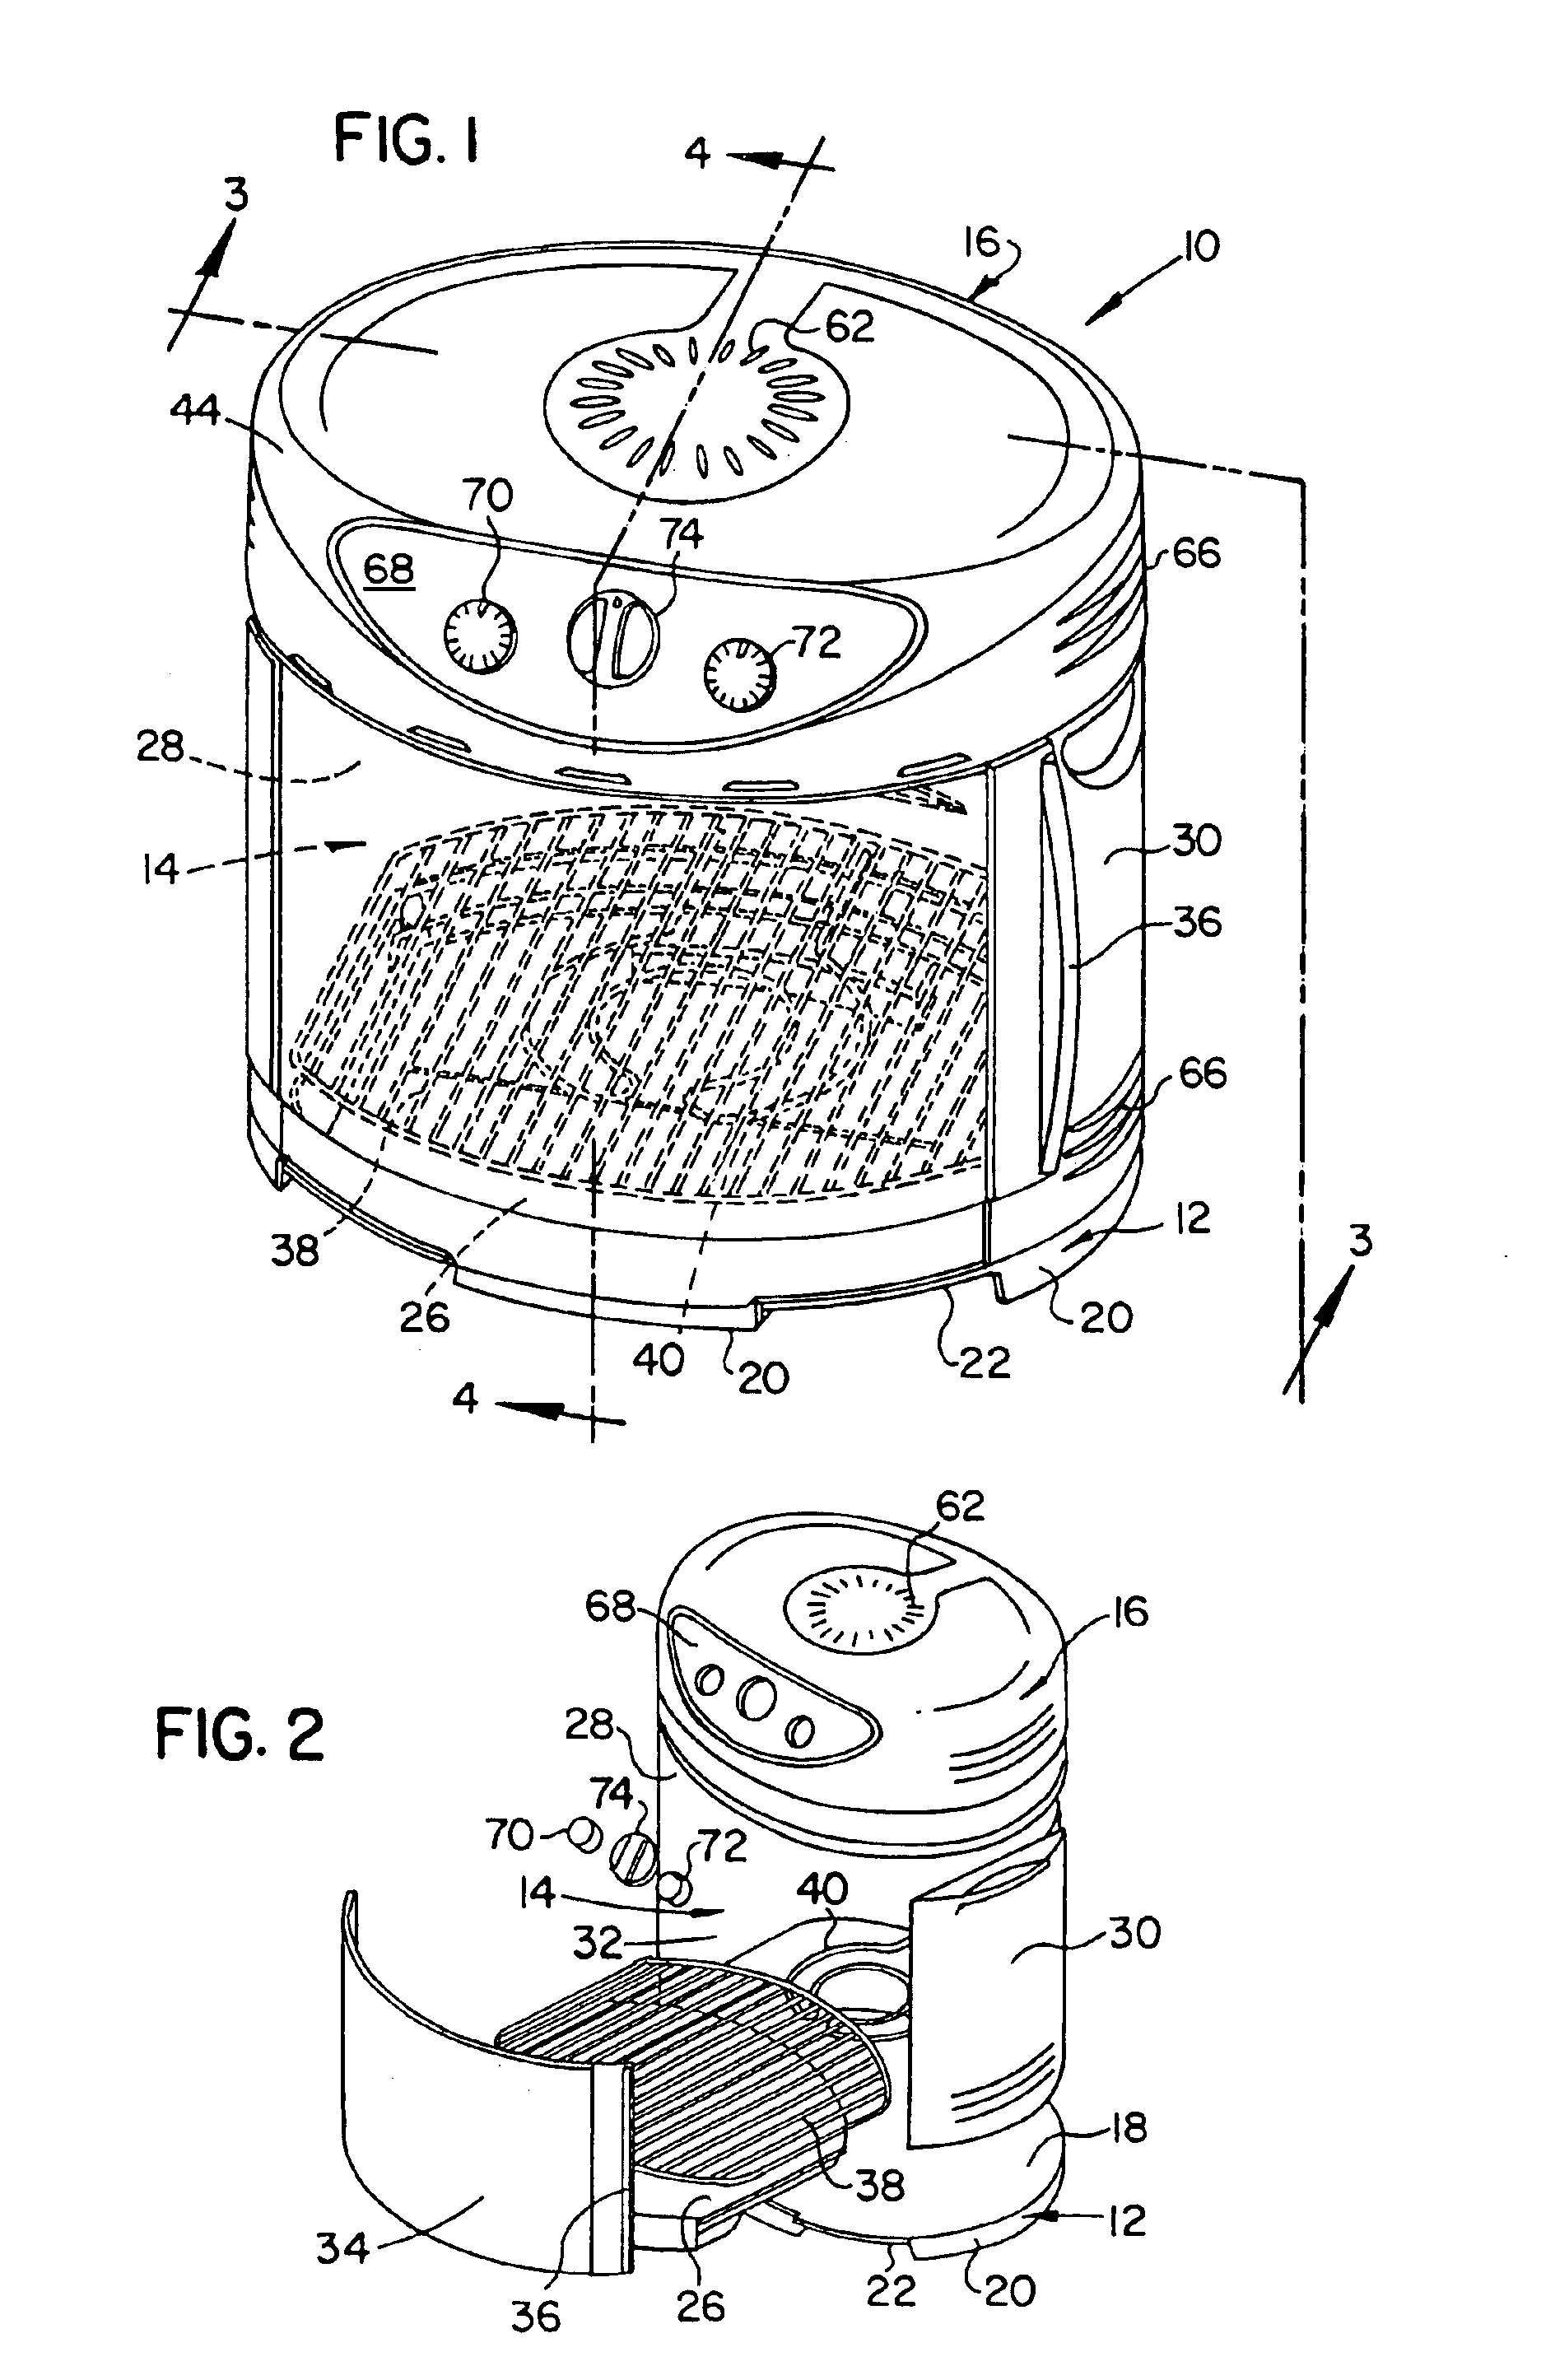 Counter-top cooker having multiple heating elements